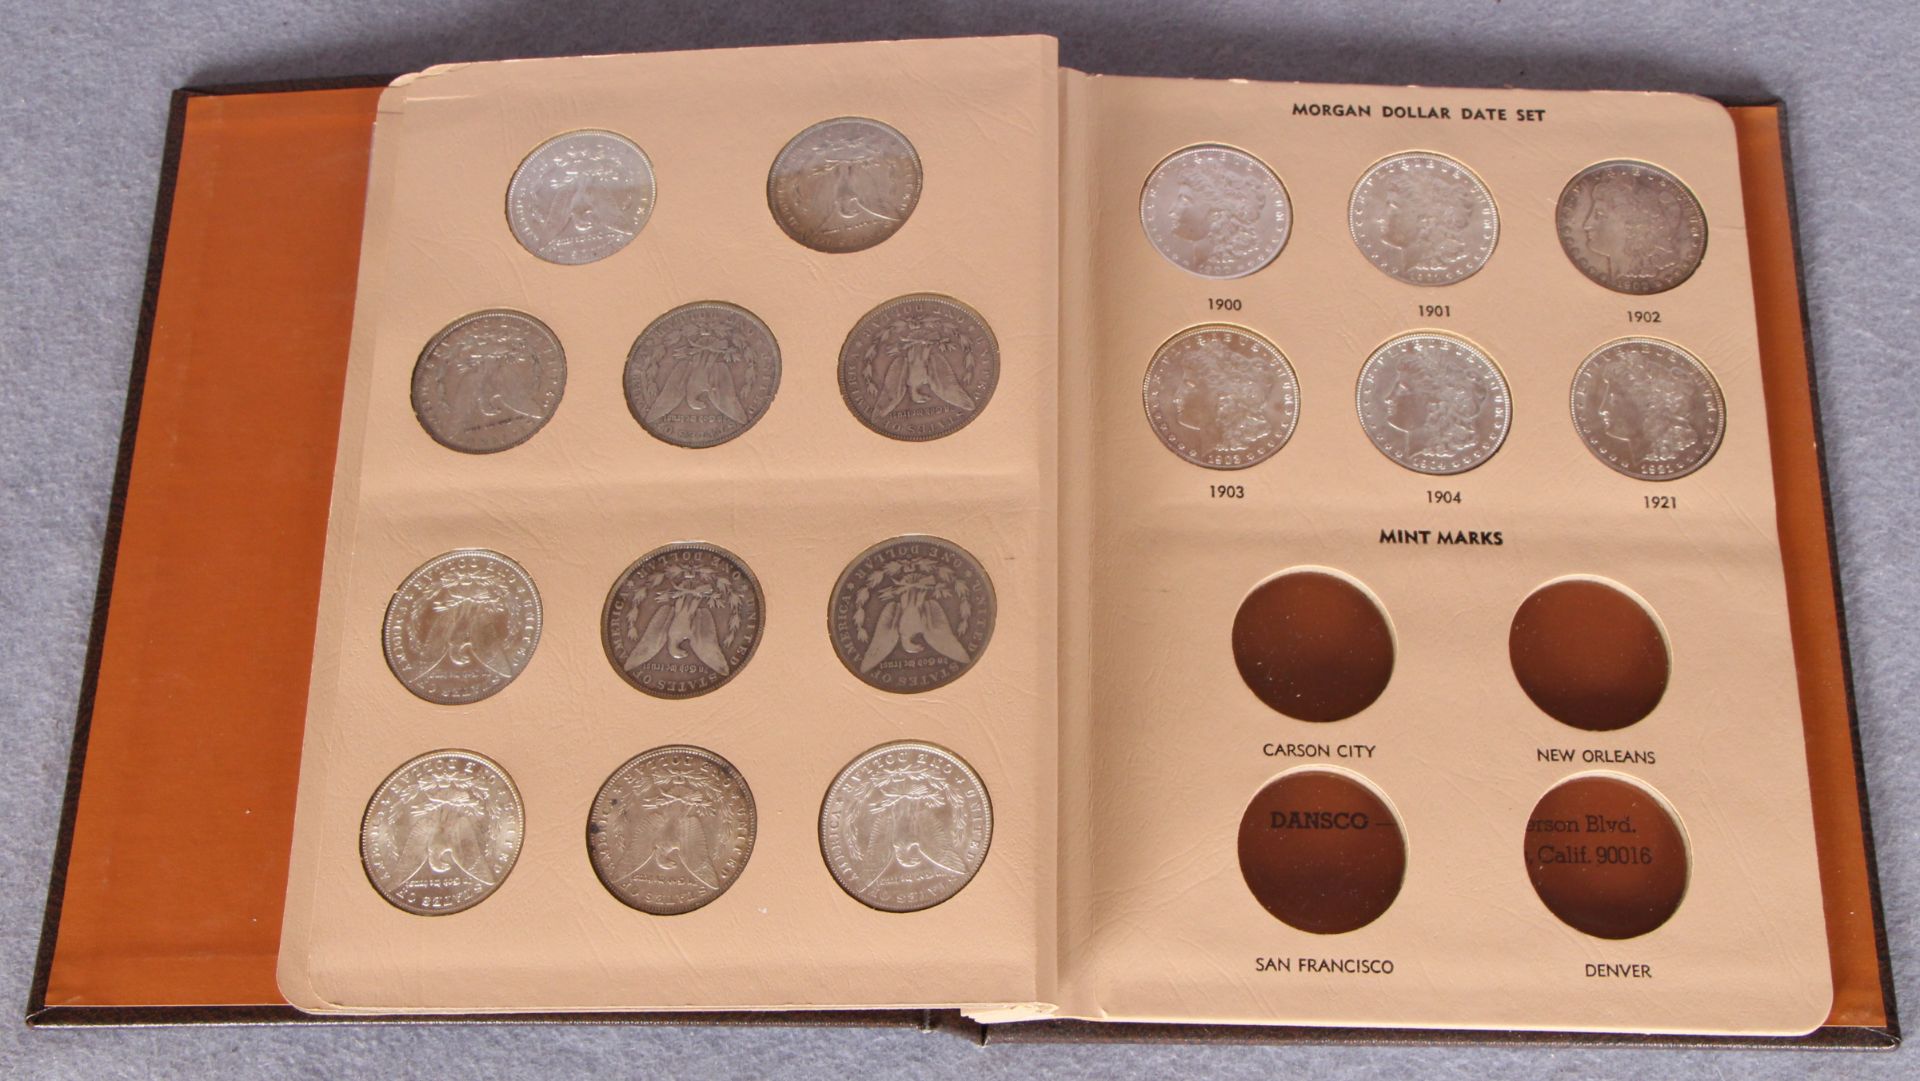 Morgan silver dollar complete date set 1878-1904 - 28 coins including rare dates 1893 and 1895 - Image 3 of 10